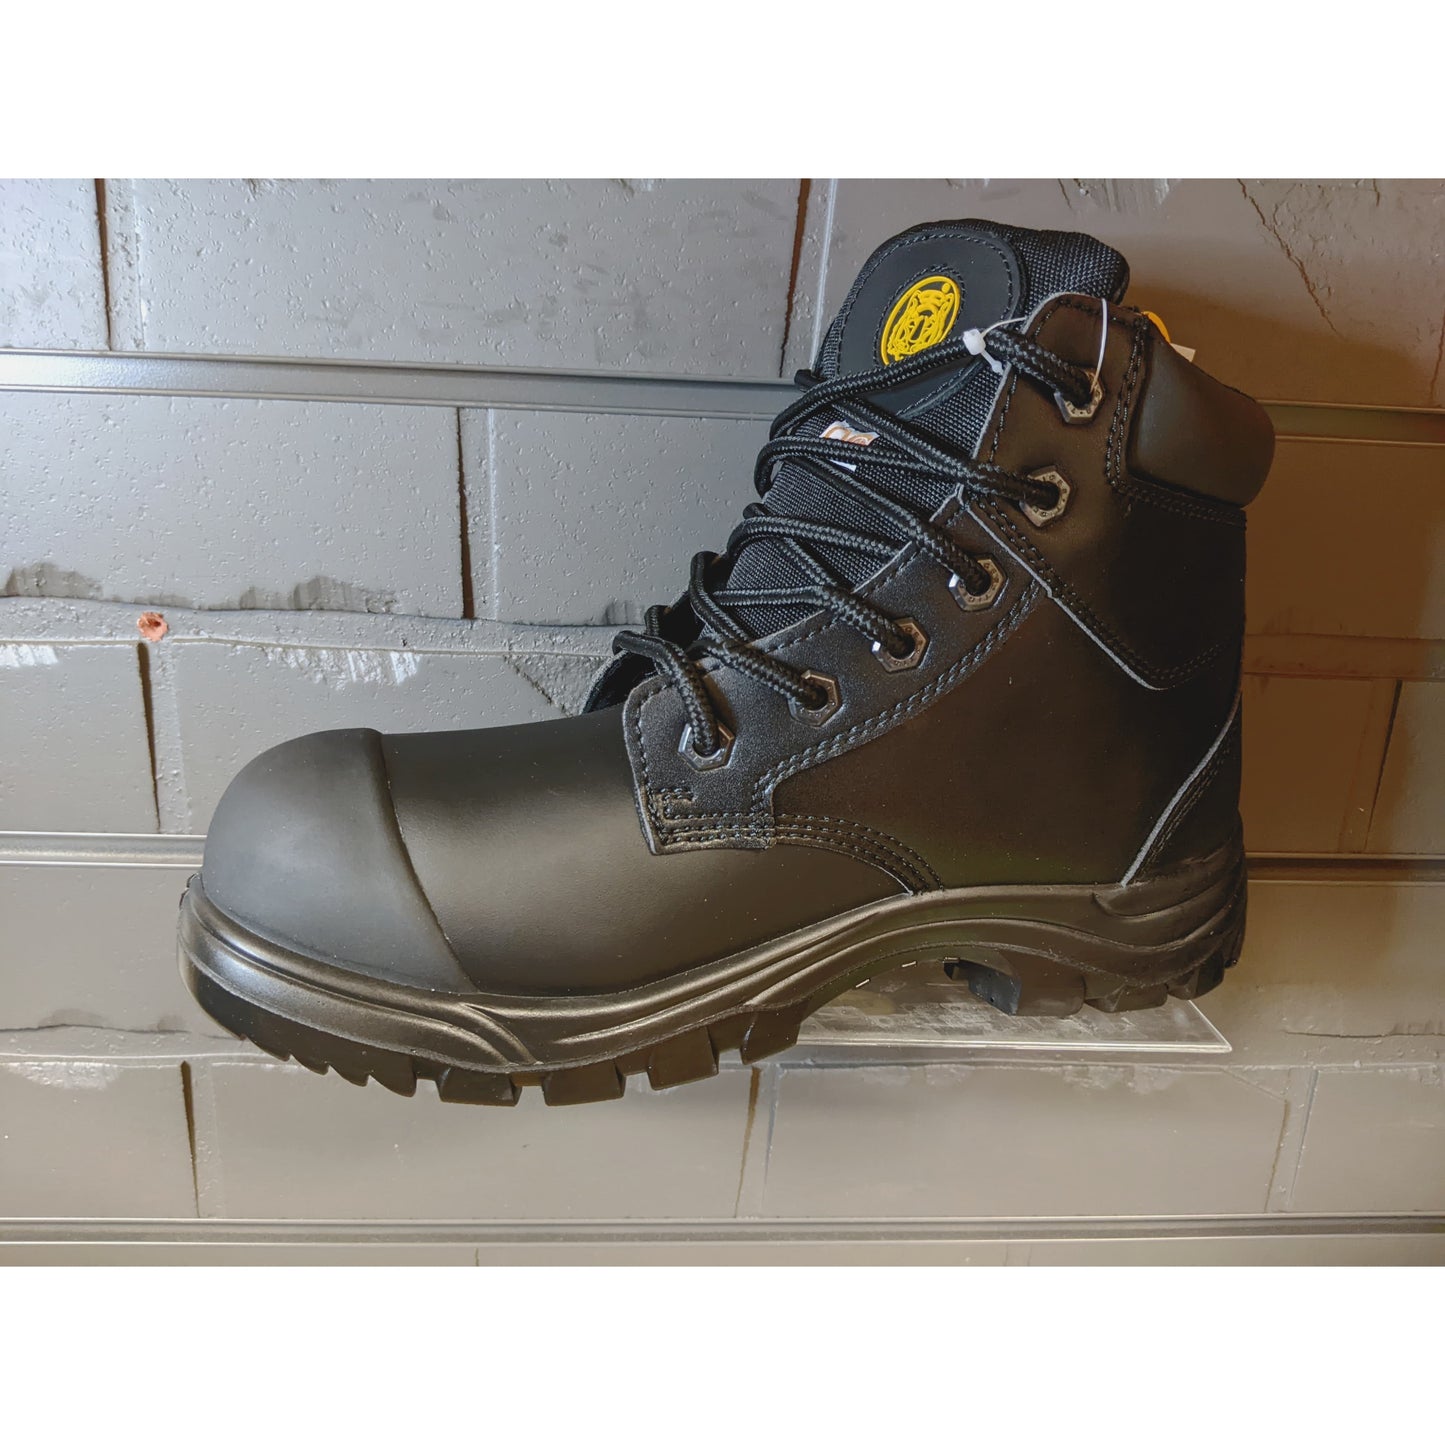 Men's Steel Toe Boots - 6" CSA Certified Safety Boot 3055W